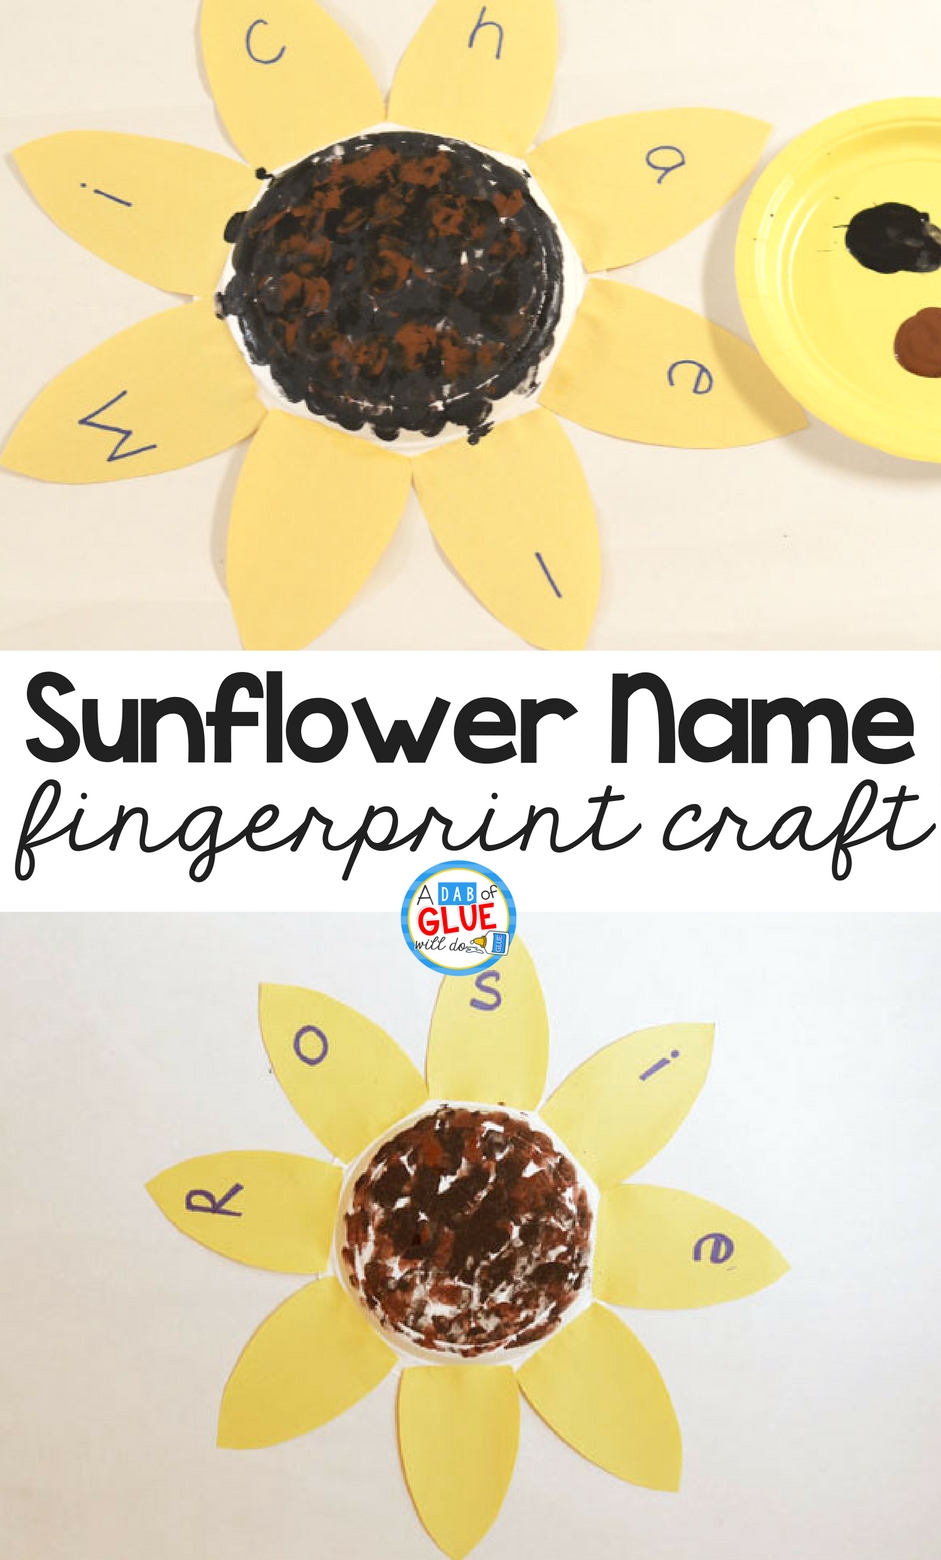 When I think of back-to-school season I usually think of apples, but my favorite August and September symbol is the sunflower. The first day of school often involves learning names too, so I thought a sunflower name and fingerprint craft would be great to along with introductions during the beginning of a new school year.